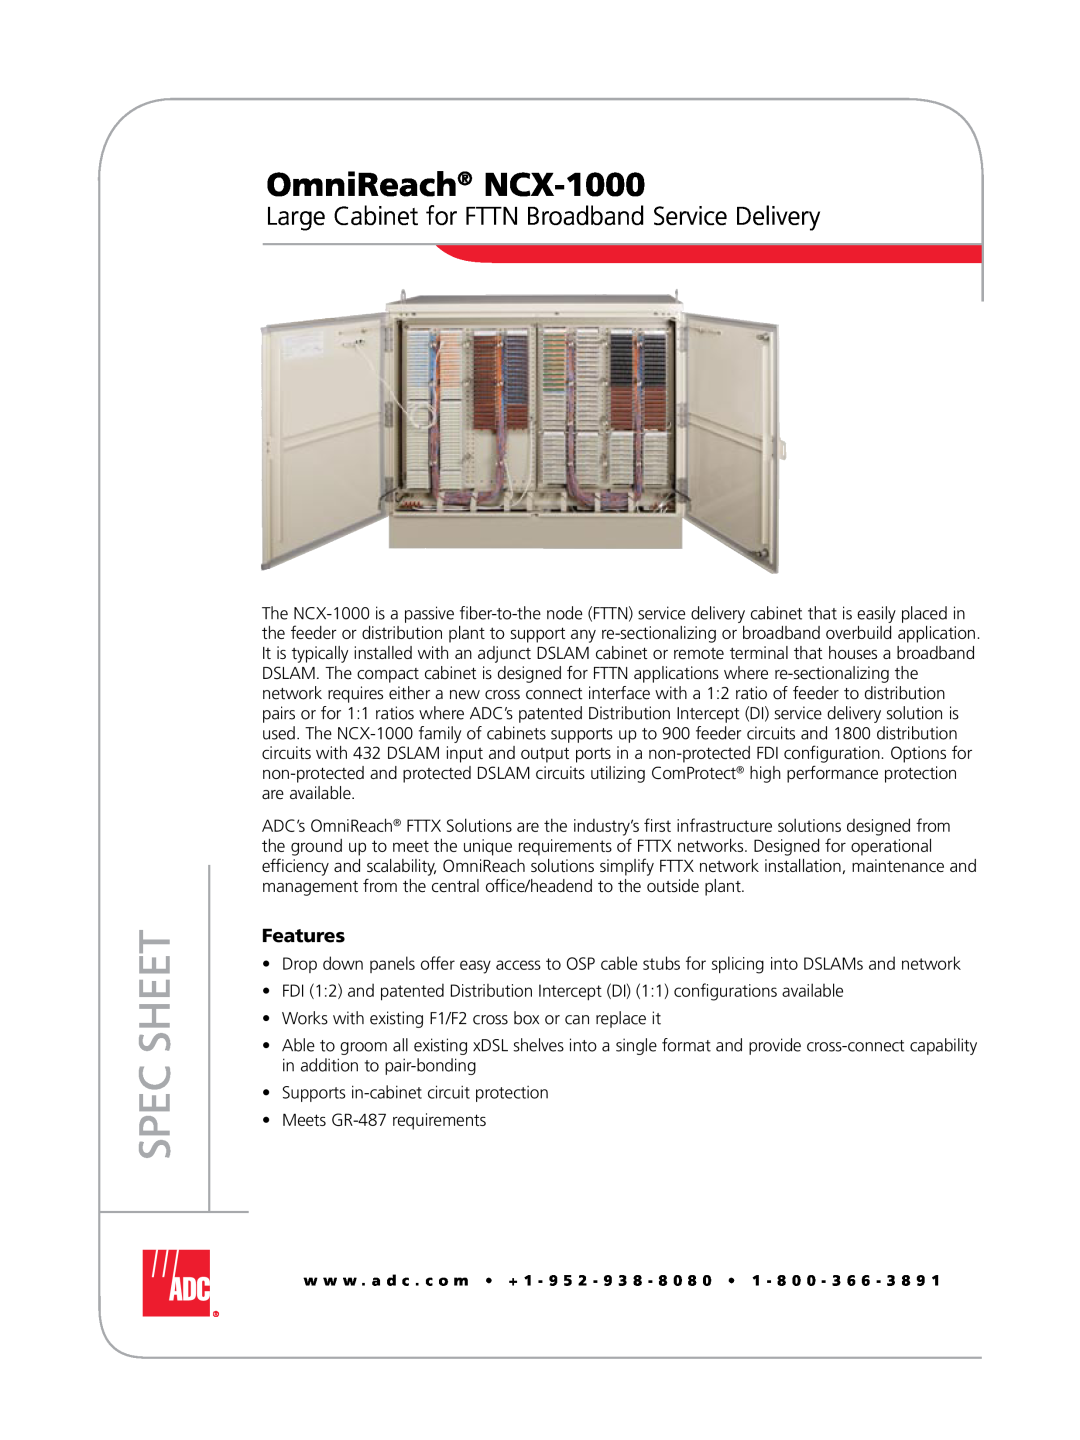 ADC manual OmniReach NCX-1000, Large Cabinet for FTTN Broadband Service Delivery, Spec Sheet, Features 